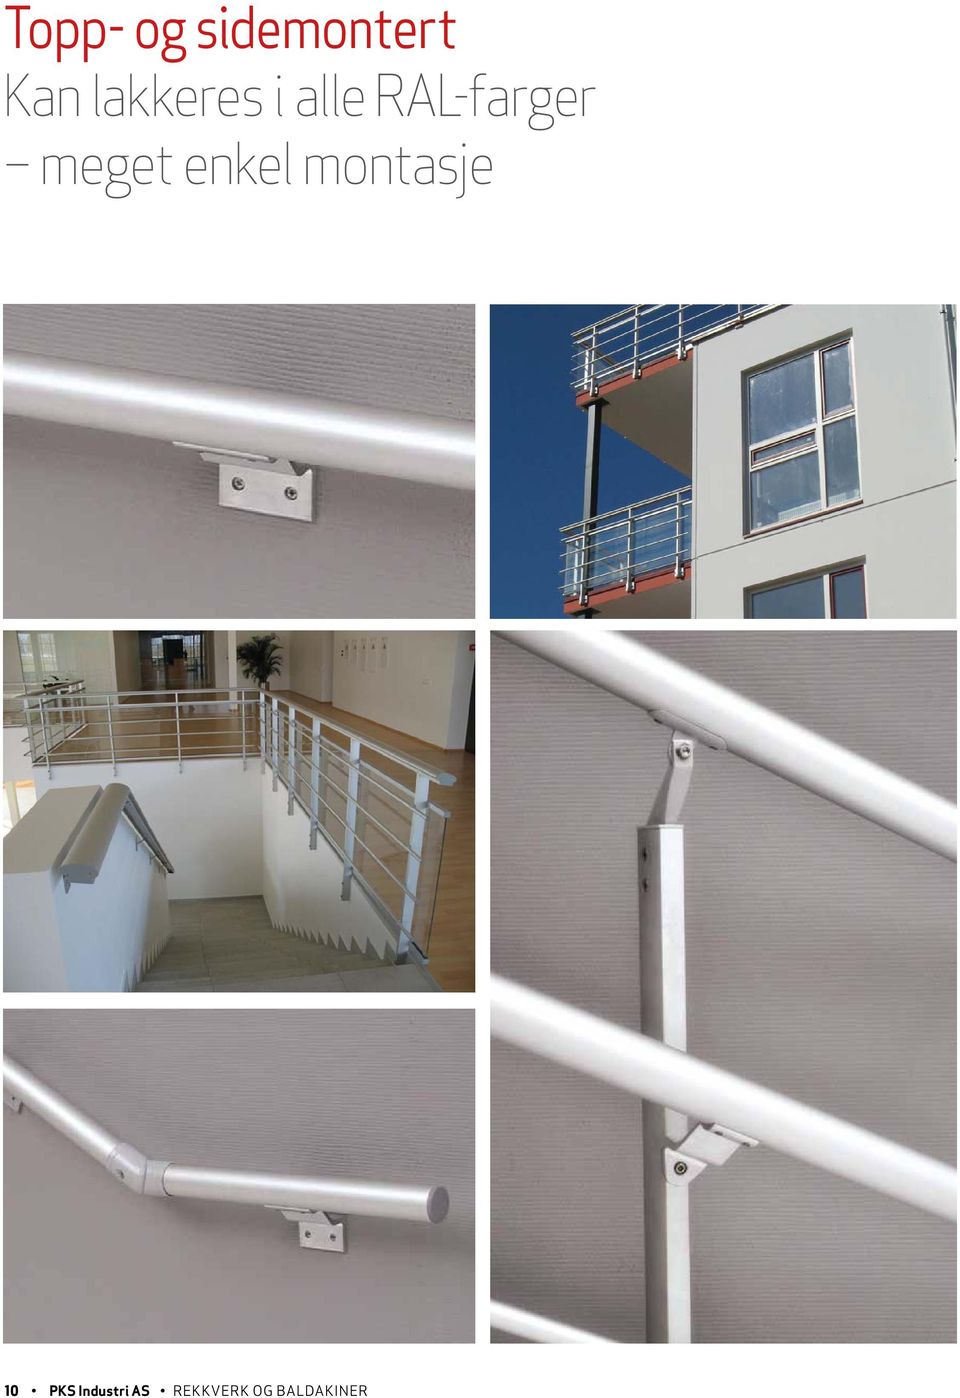 Balustrades allows you to create different configurations balustrades systems.